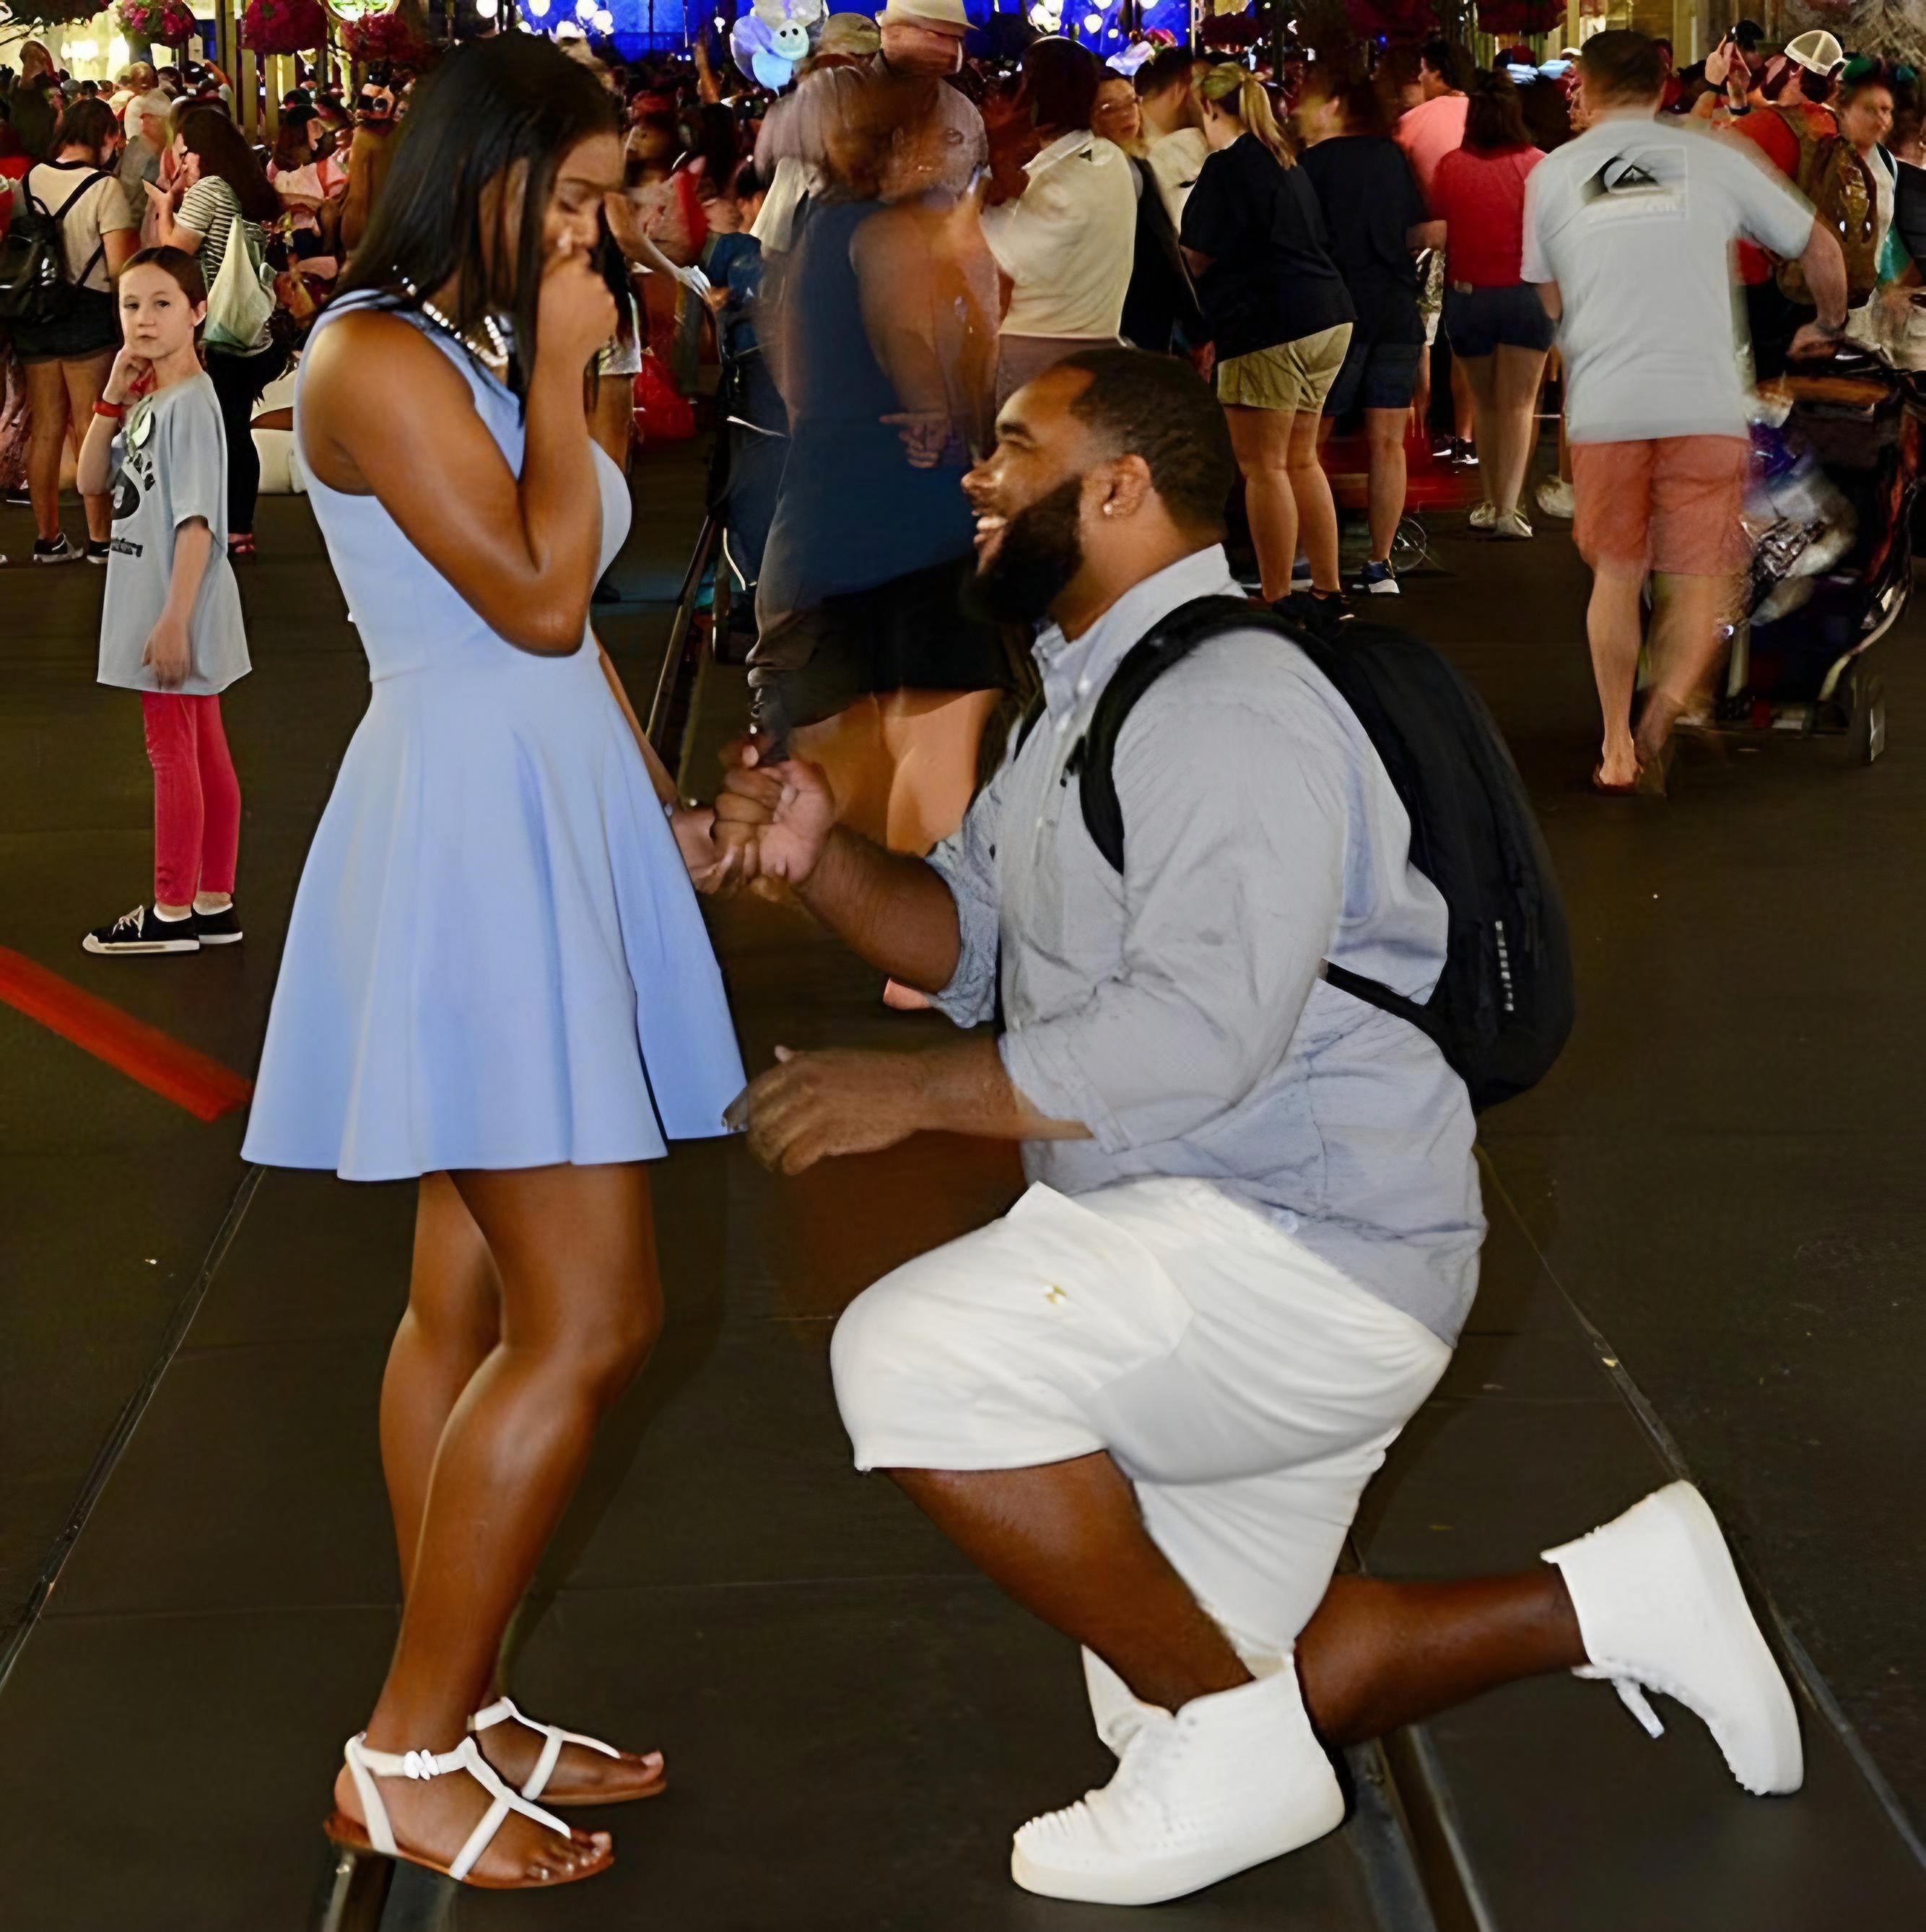 5 Things to Know Before Proposing to a Woman